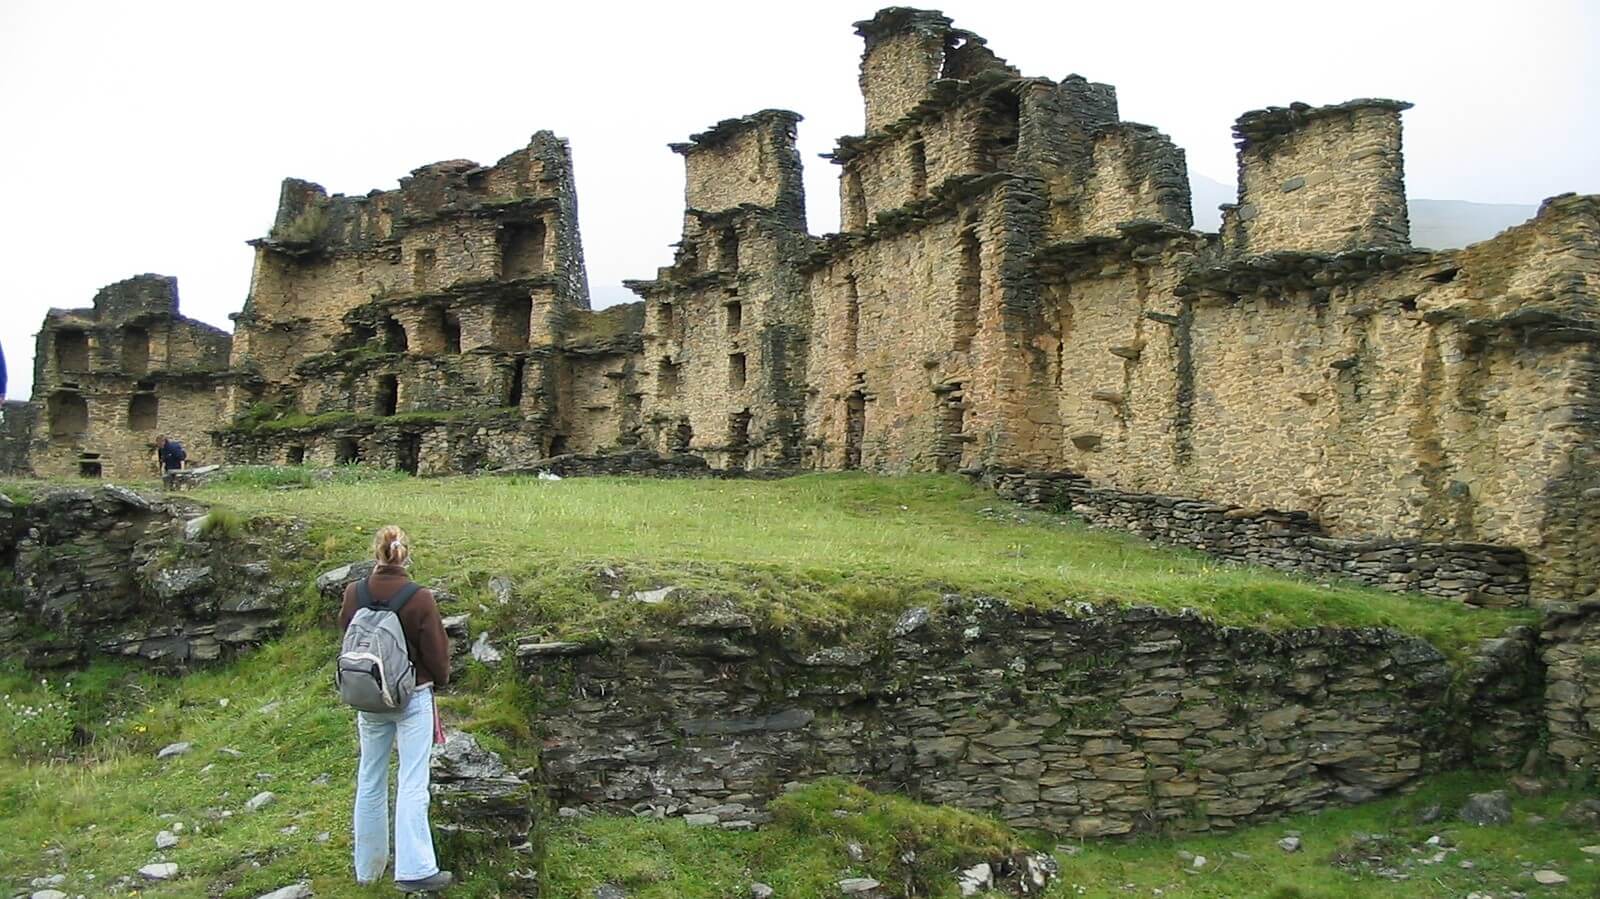 The so-called skycrapers of the Andes, the archaeological site of Tantamayo in Huanuco, Peru. A very spectacular off the beaten destination that you could visit with RESPONSible Travel Peru.